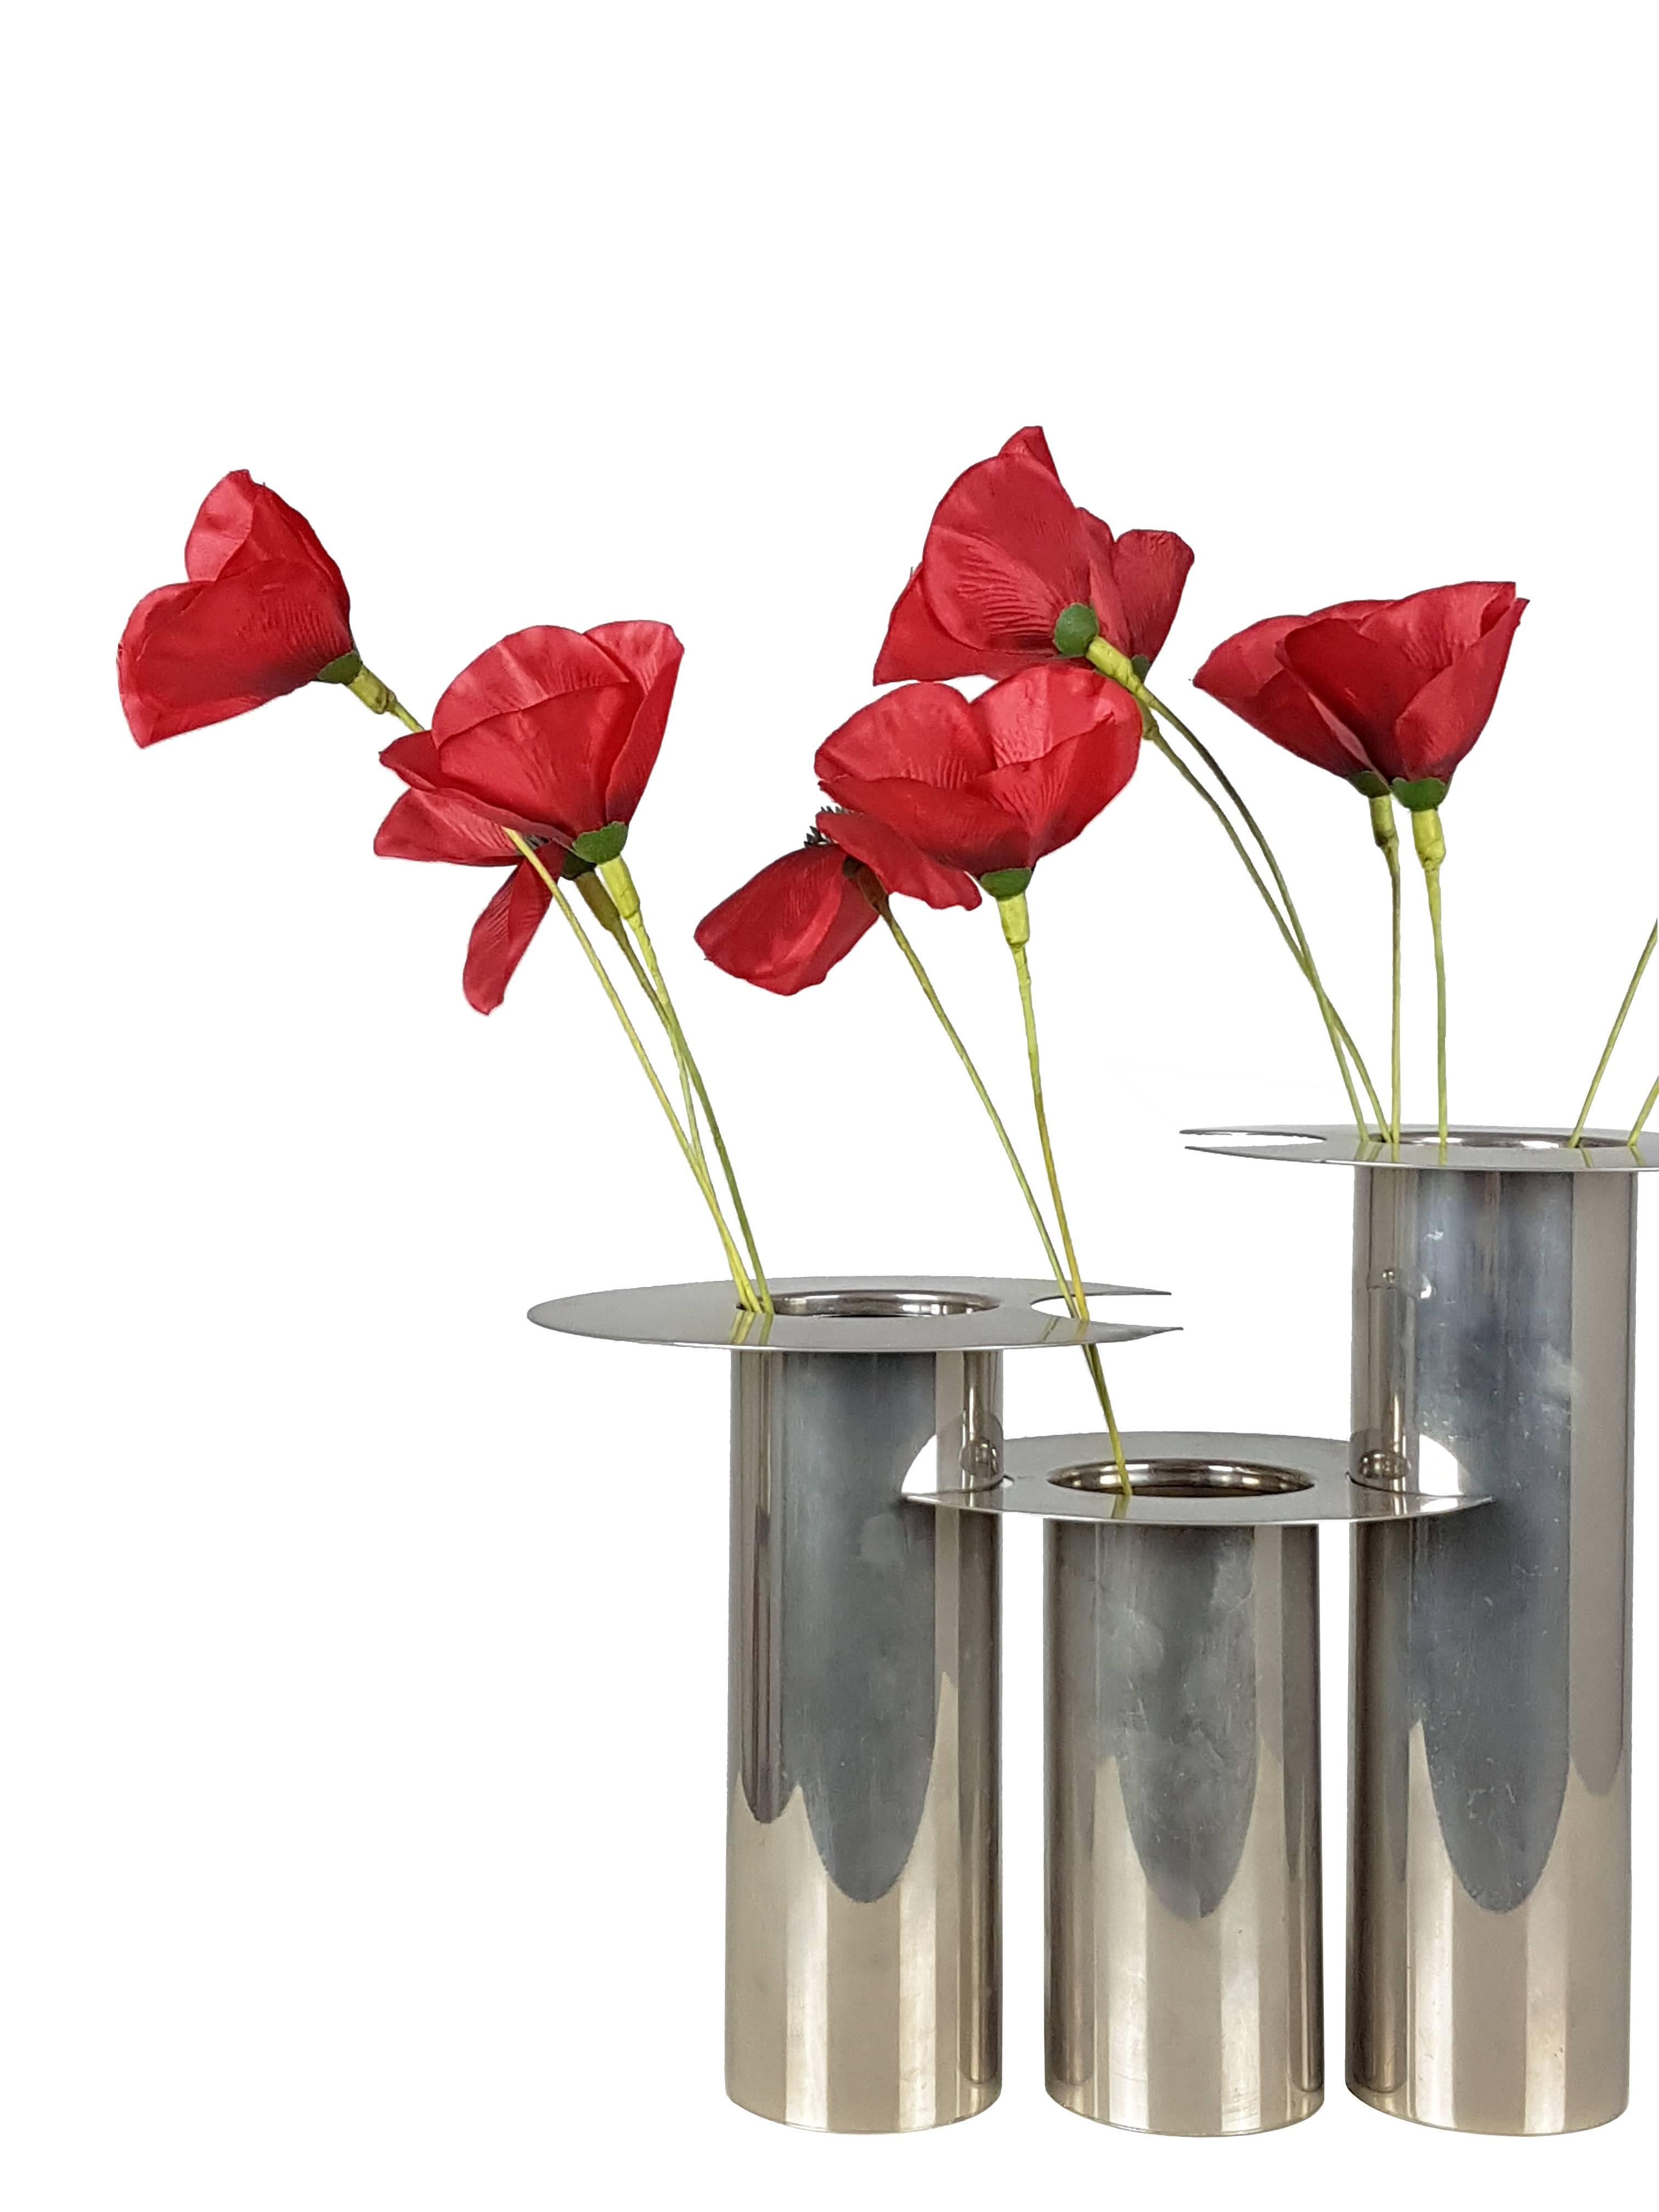 This elegant set of three vases was designed and produced in Italy, circa 1970s. They are made from nickel-plated metal and they can be used separately or combined. The set remains in excellent vintage condition.